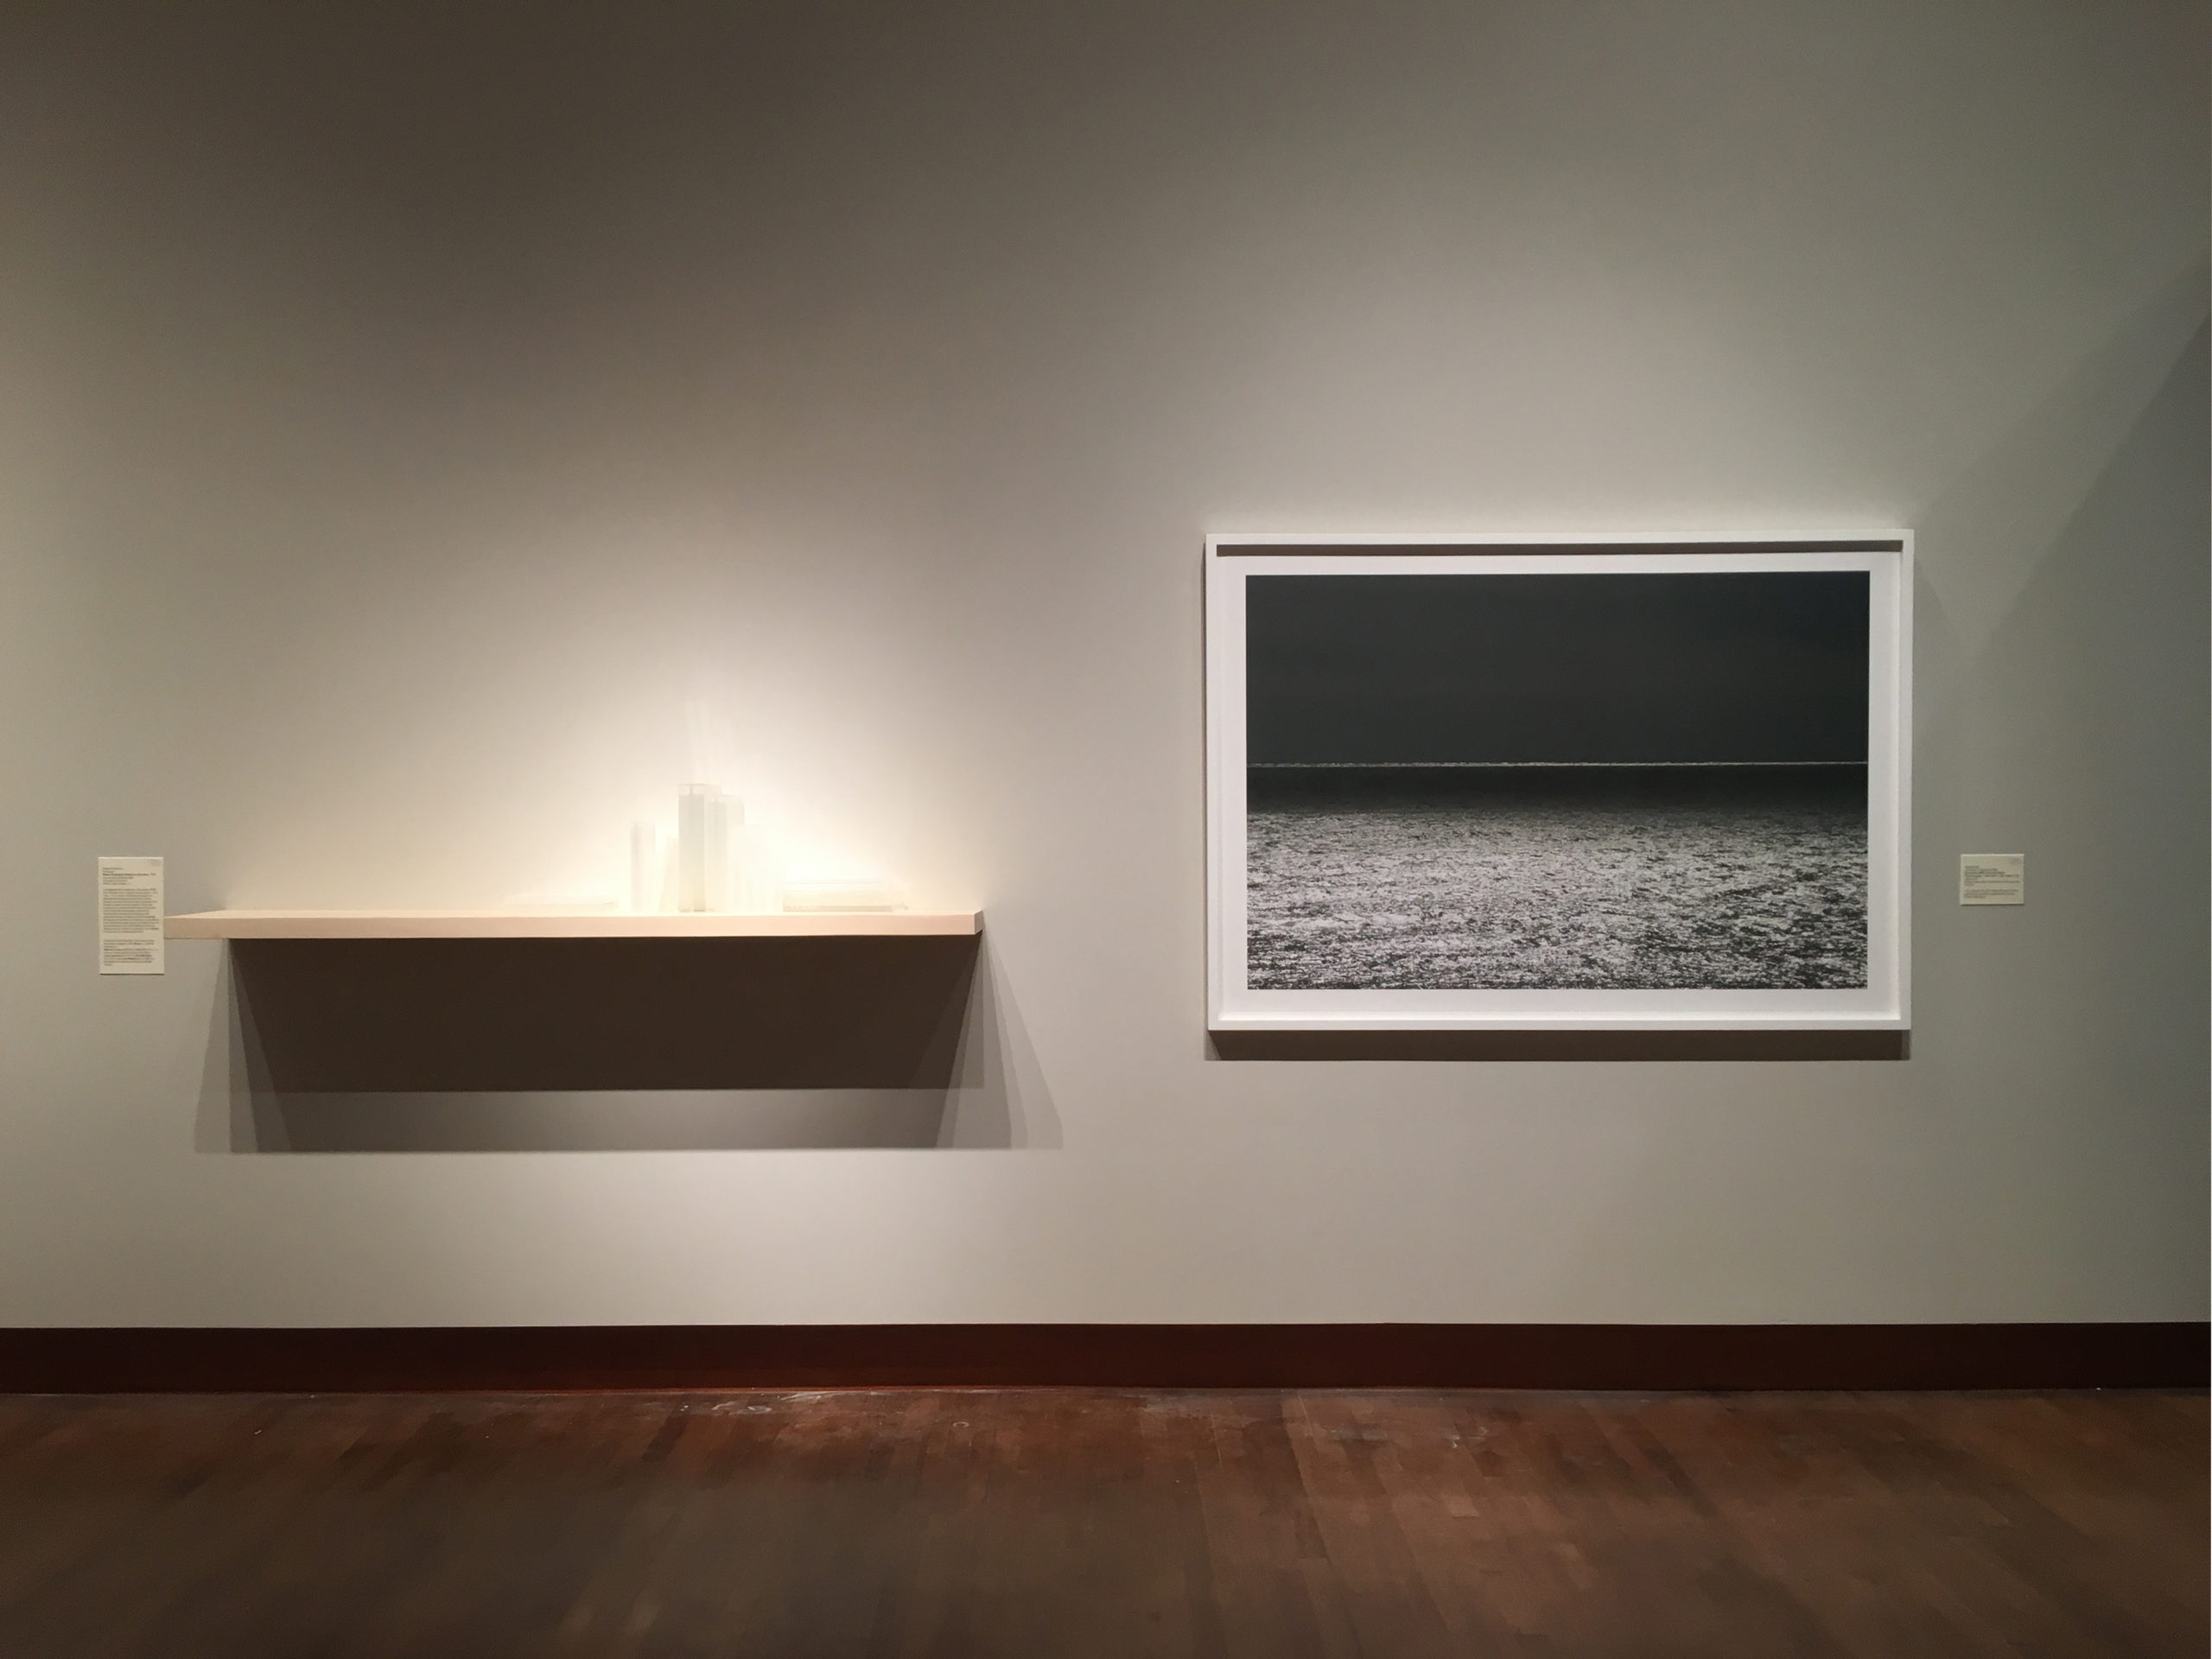 left: Sarah FitzSimons, "Water Biography (Selected Volumes)", 2019; right: Renate Aller, "Oceanscapes - One View - Ten Years", 2008
installation view Chazen Museum of Art, February 2020